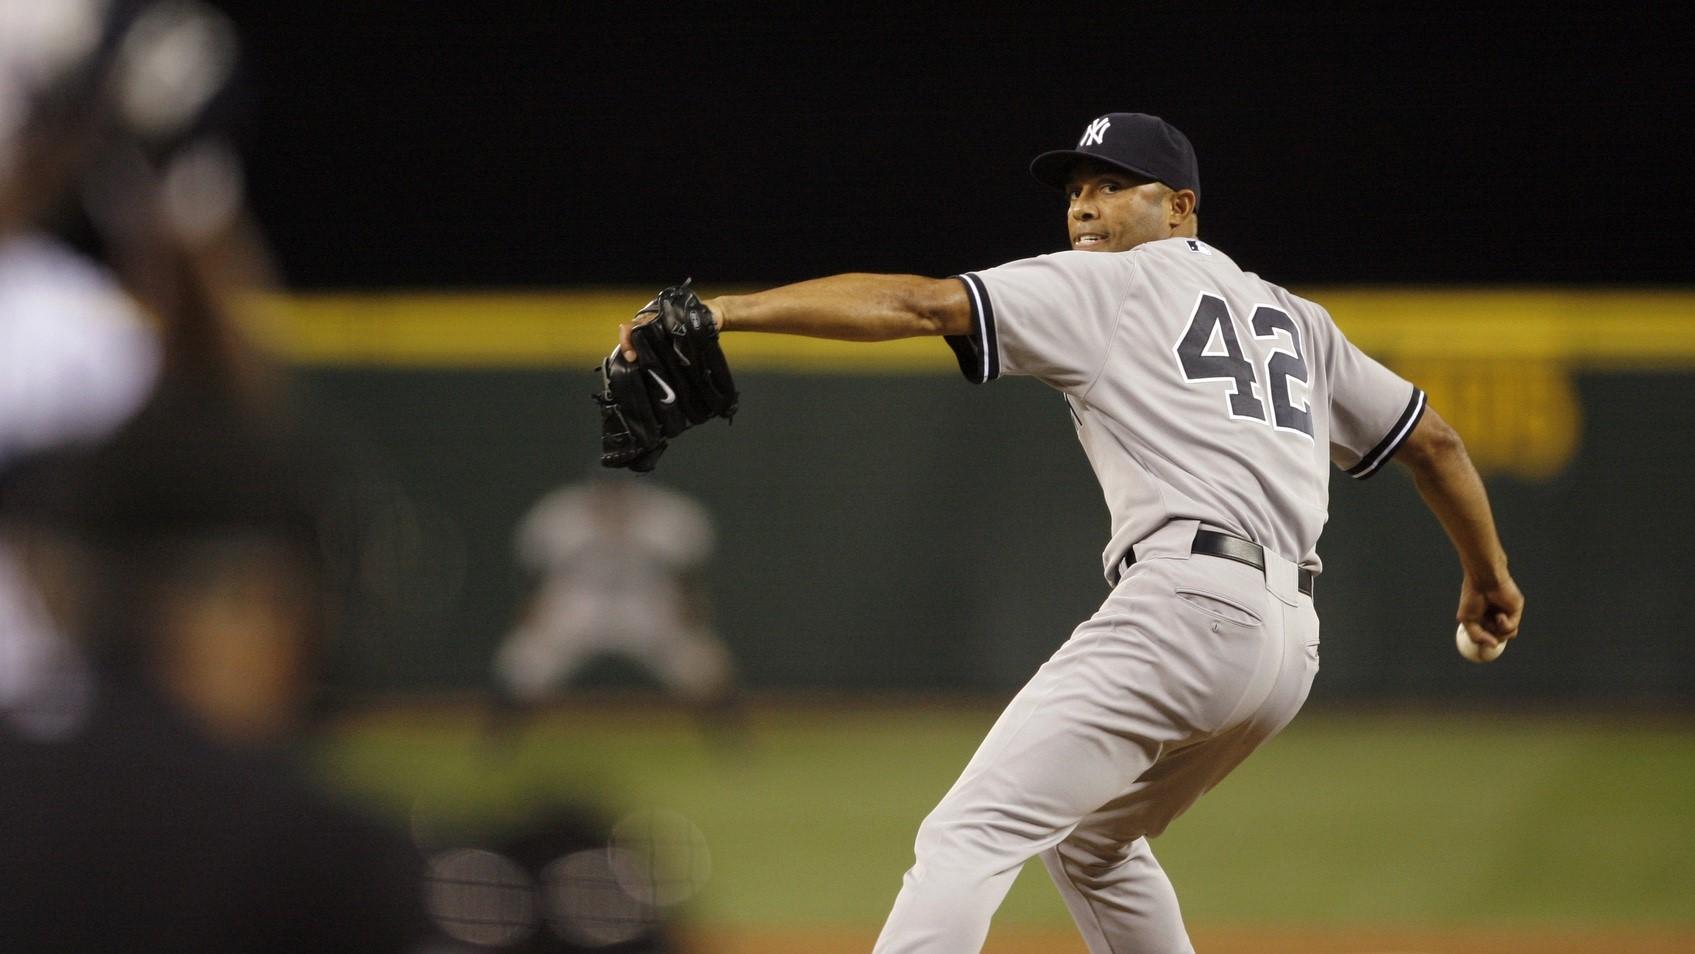 Sept 13, 2011, Seattle, WA, USA; New York Yankees relief pitcher Mariano Rivera (42) delivers to the plate against the Seattle Mariners during the 9th inning at Safeco Field. New York defeated Seattle, 3-2 and Rivera earned his 600th save. / Joe Nicholson-USA TODAY Sports